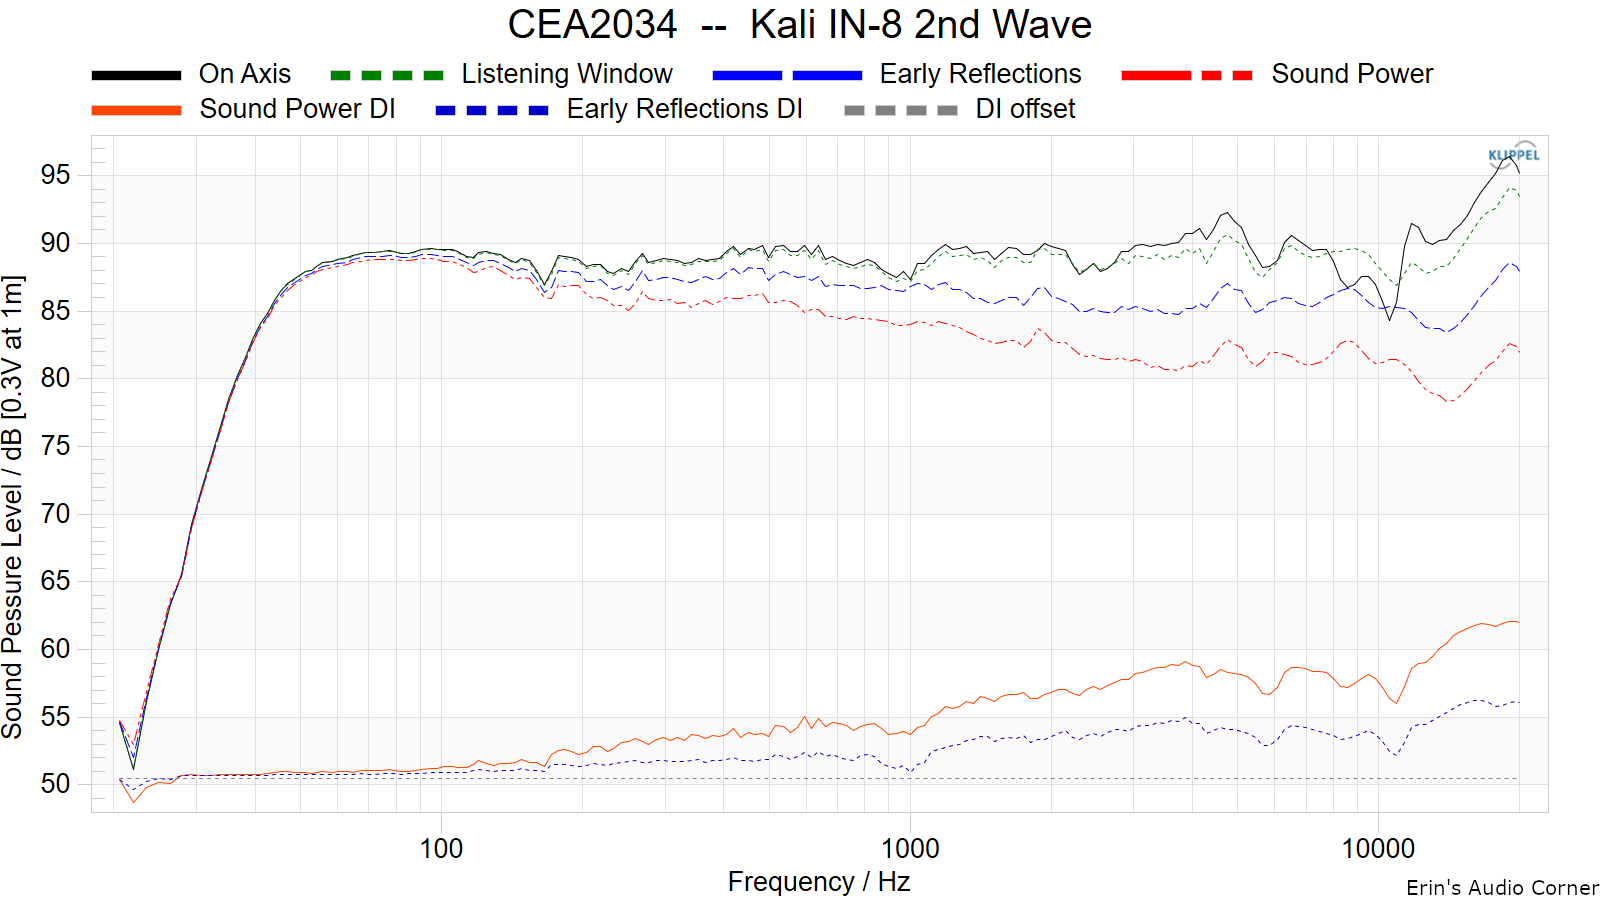 CEA2034%20%20--%20%20Kali%20IN-8%202nd%20Wave.png